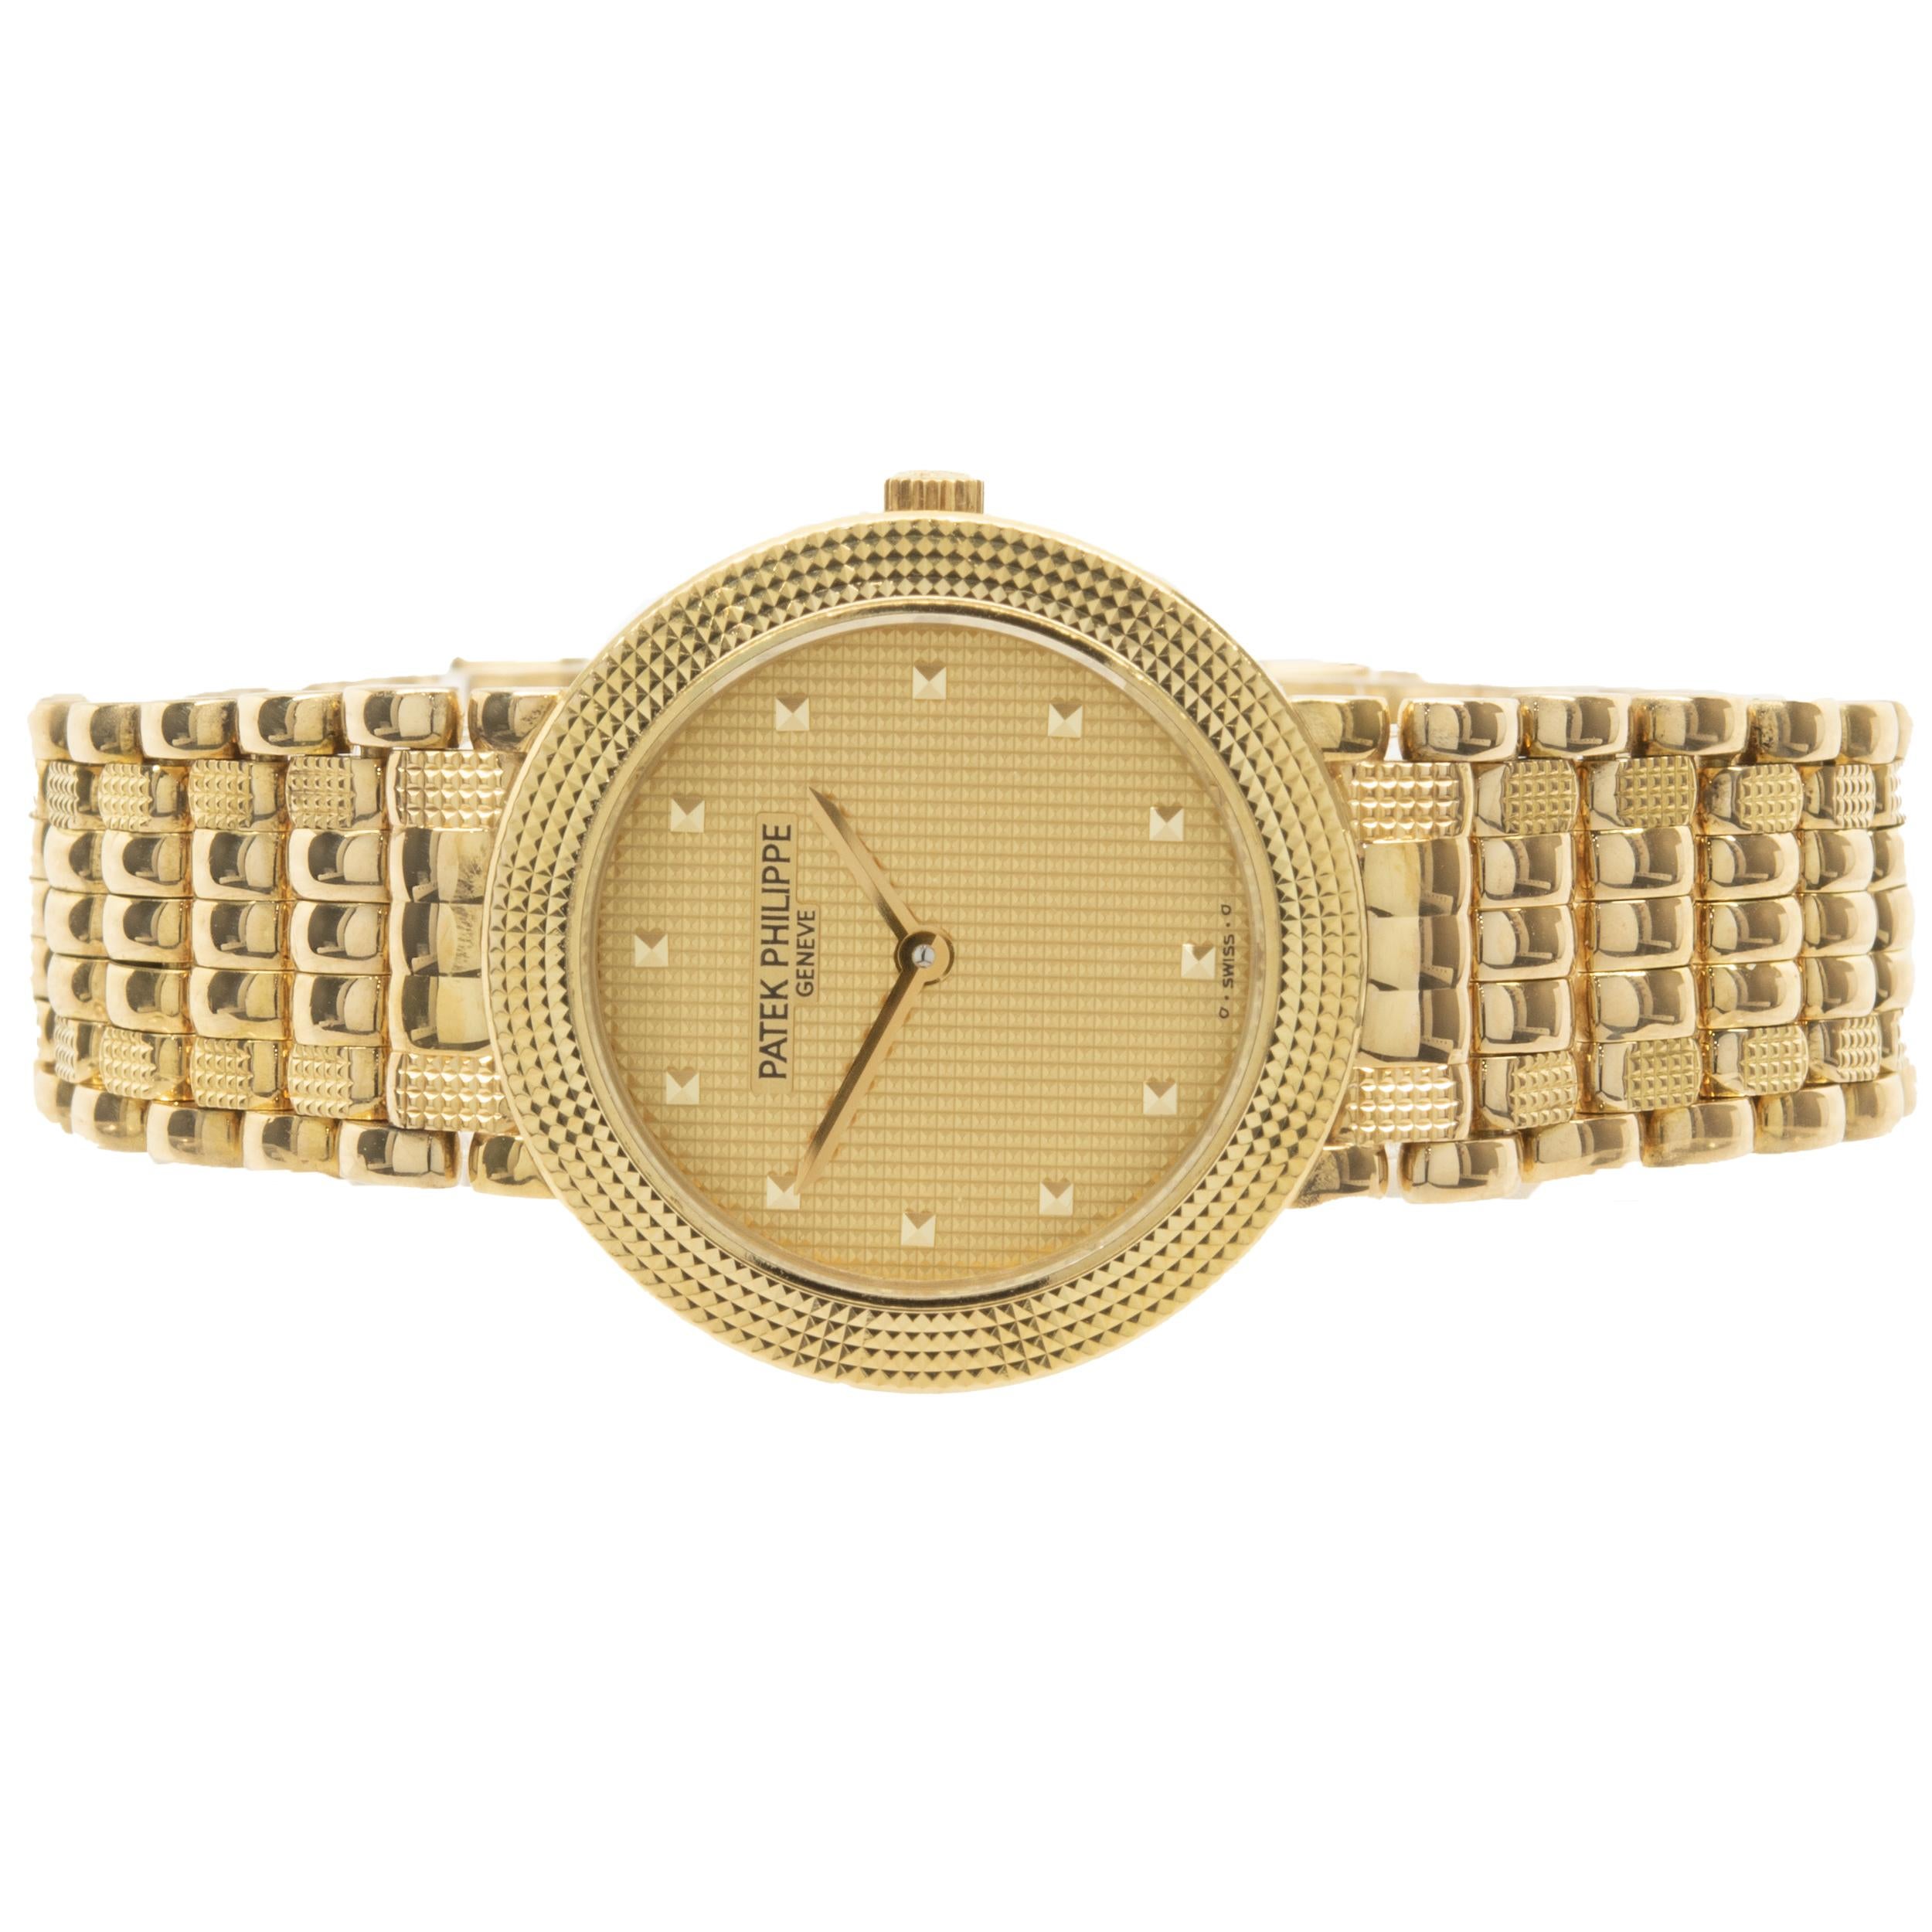 Movement: quartz
Function: hours, minutes
Case: 25mm 18K yellow gold case, hobnail bezel, sapphire crystal, push pull crown
Band: 18K yellow gold hobnail link bracelet,  fold over clasp
Dial: champagne hobnail dial
Reference: 4919/8
Serial: